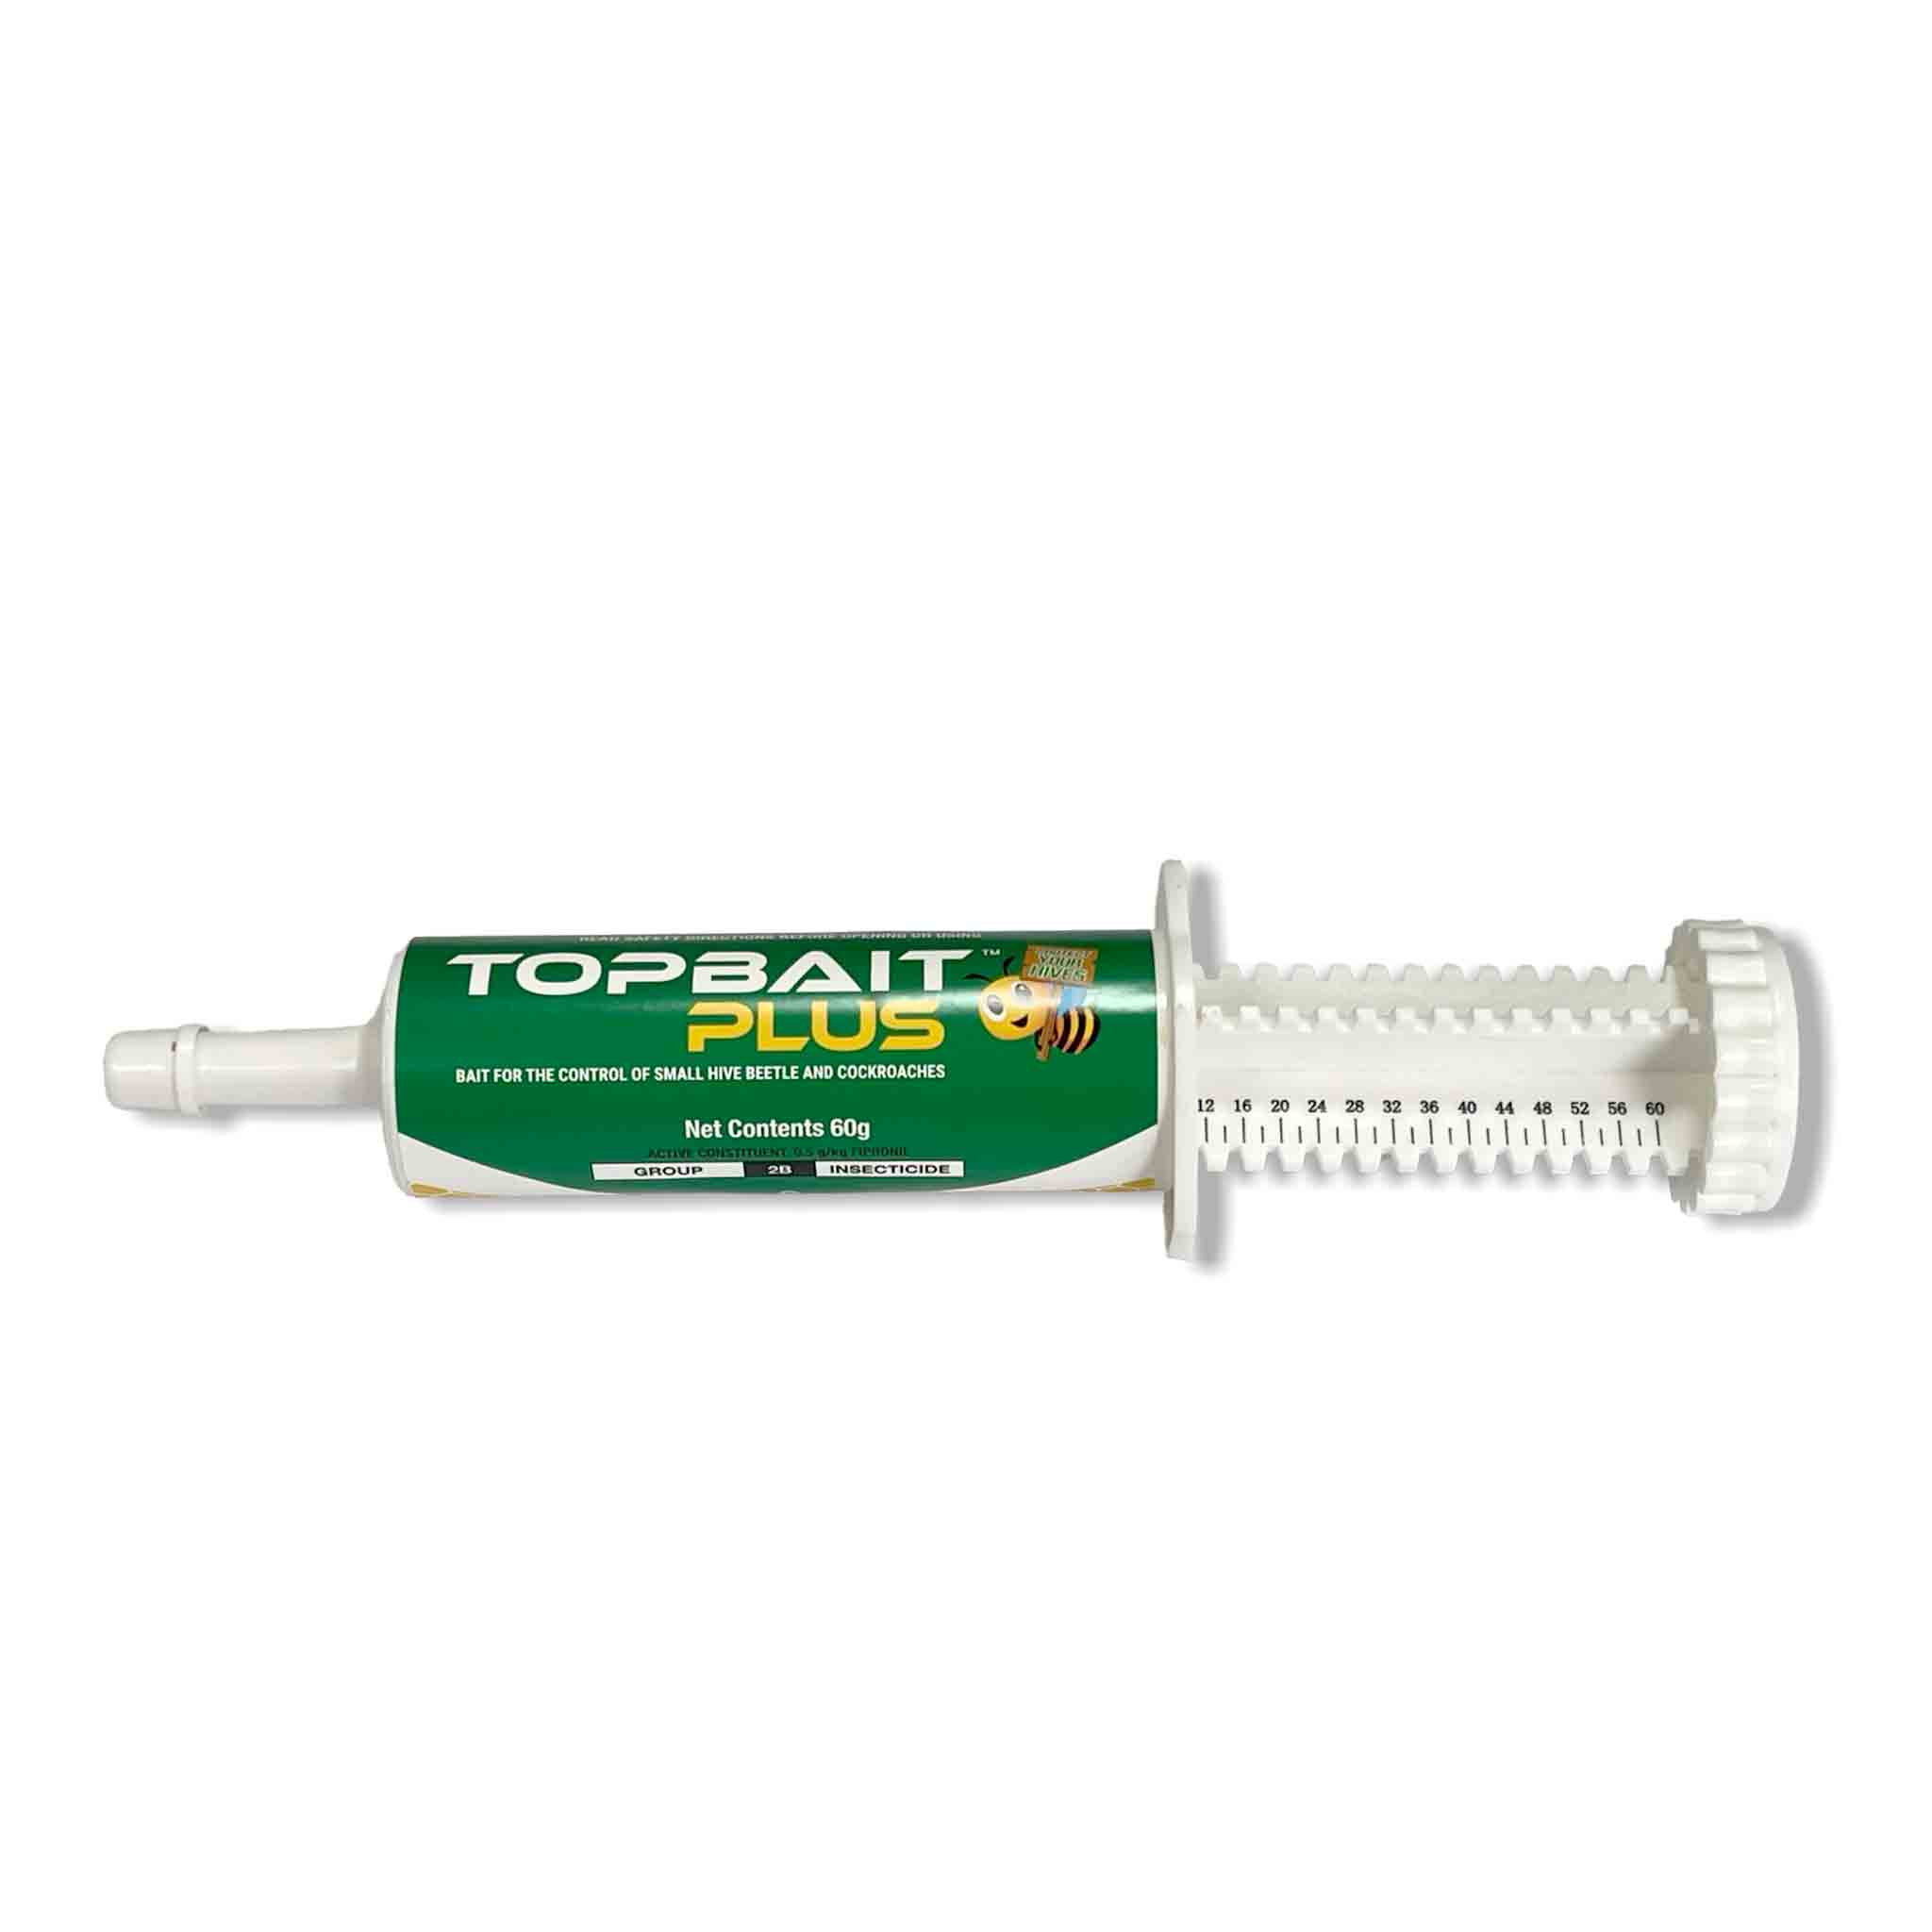 TopBait Plus 60g Applicator for Treatment and Control of Small Hive Beetles and Cockroaches - Health collection by Buzzbee Beekeeping Supplies